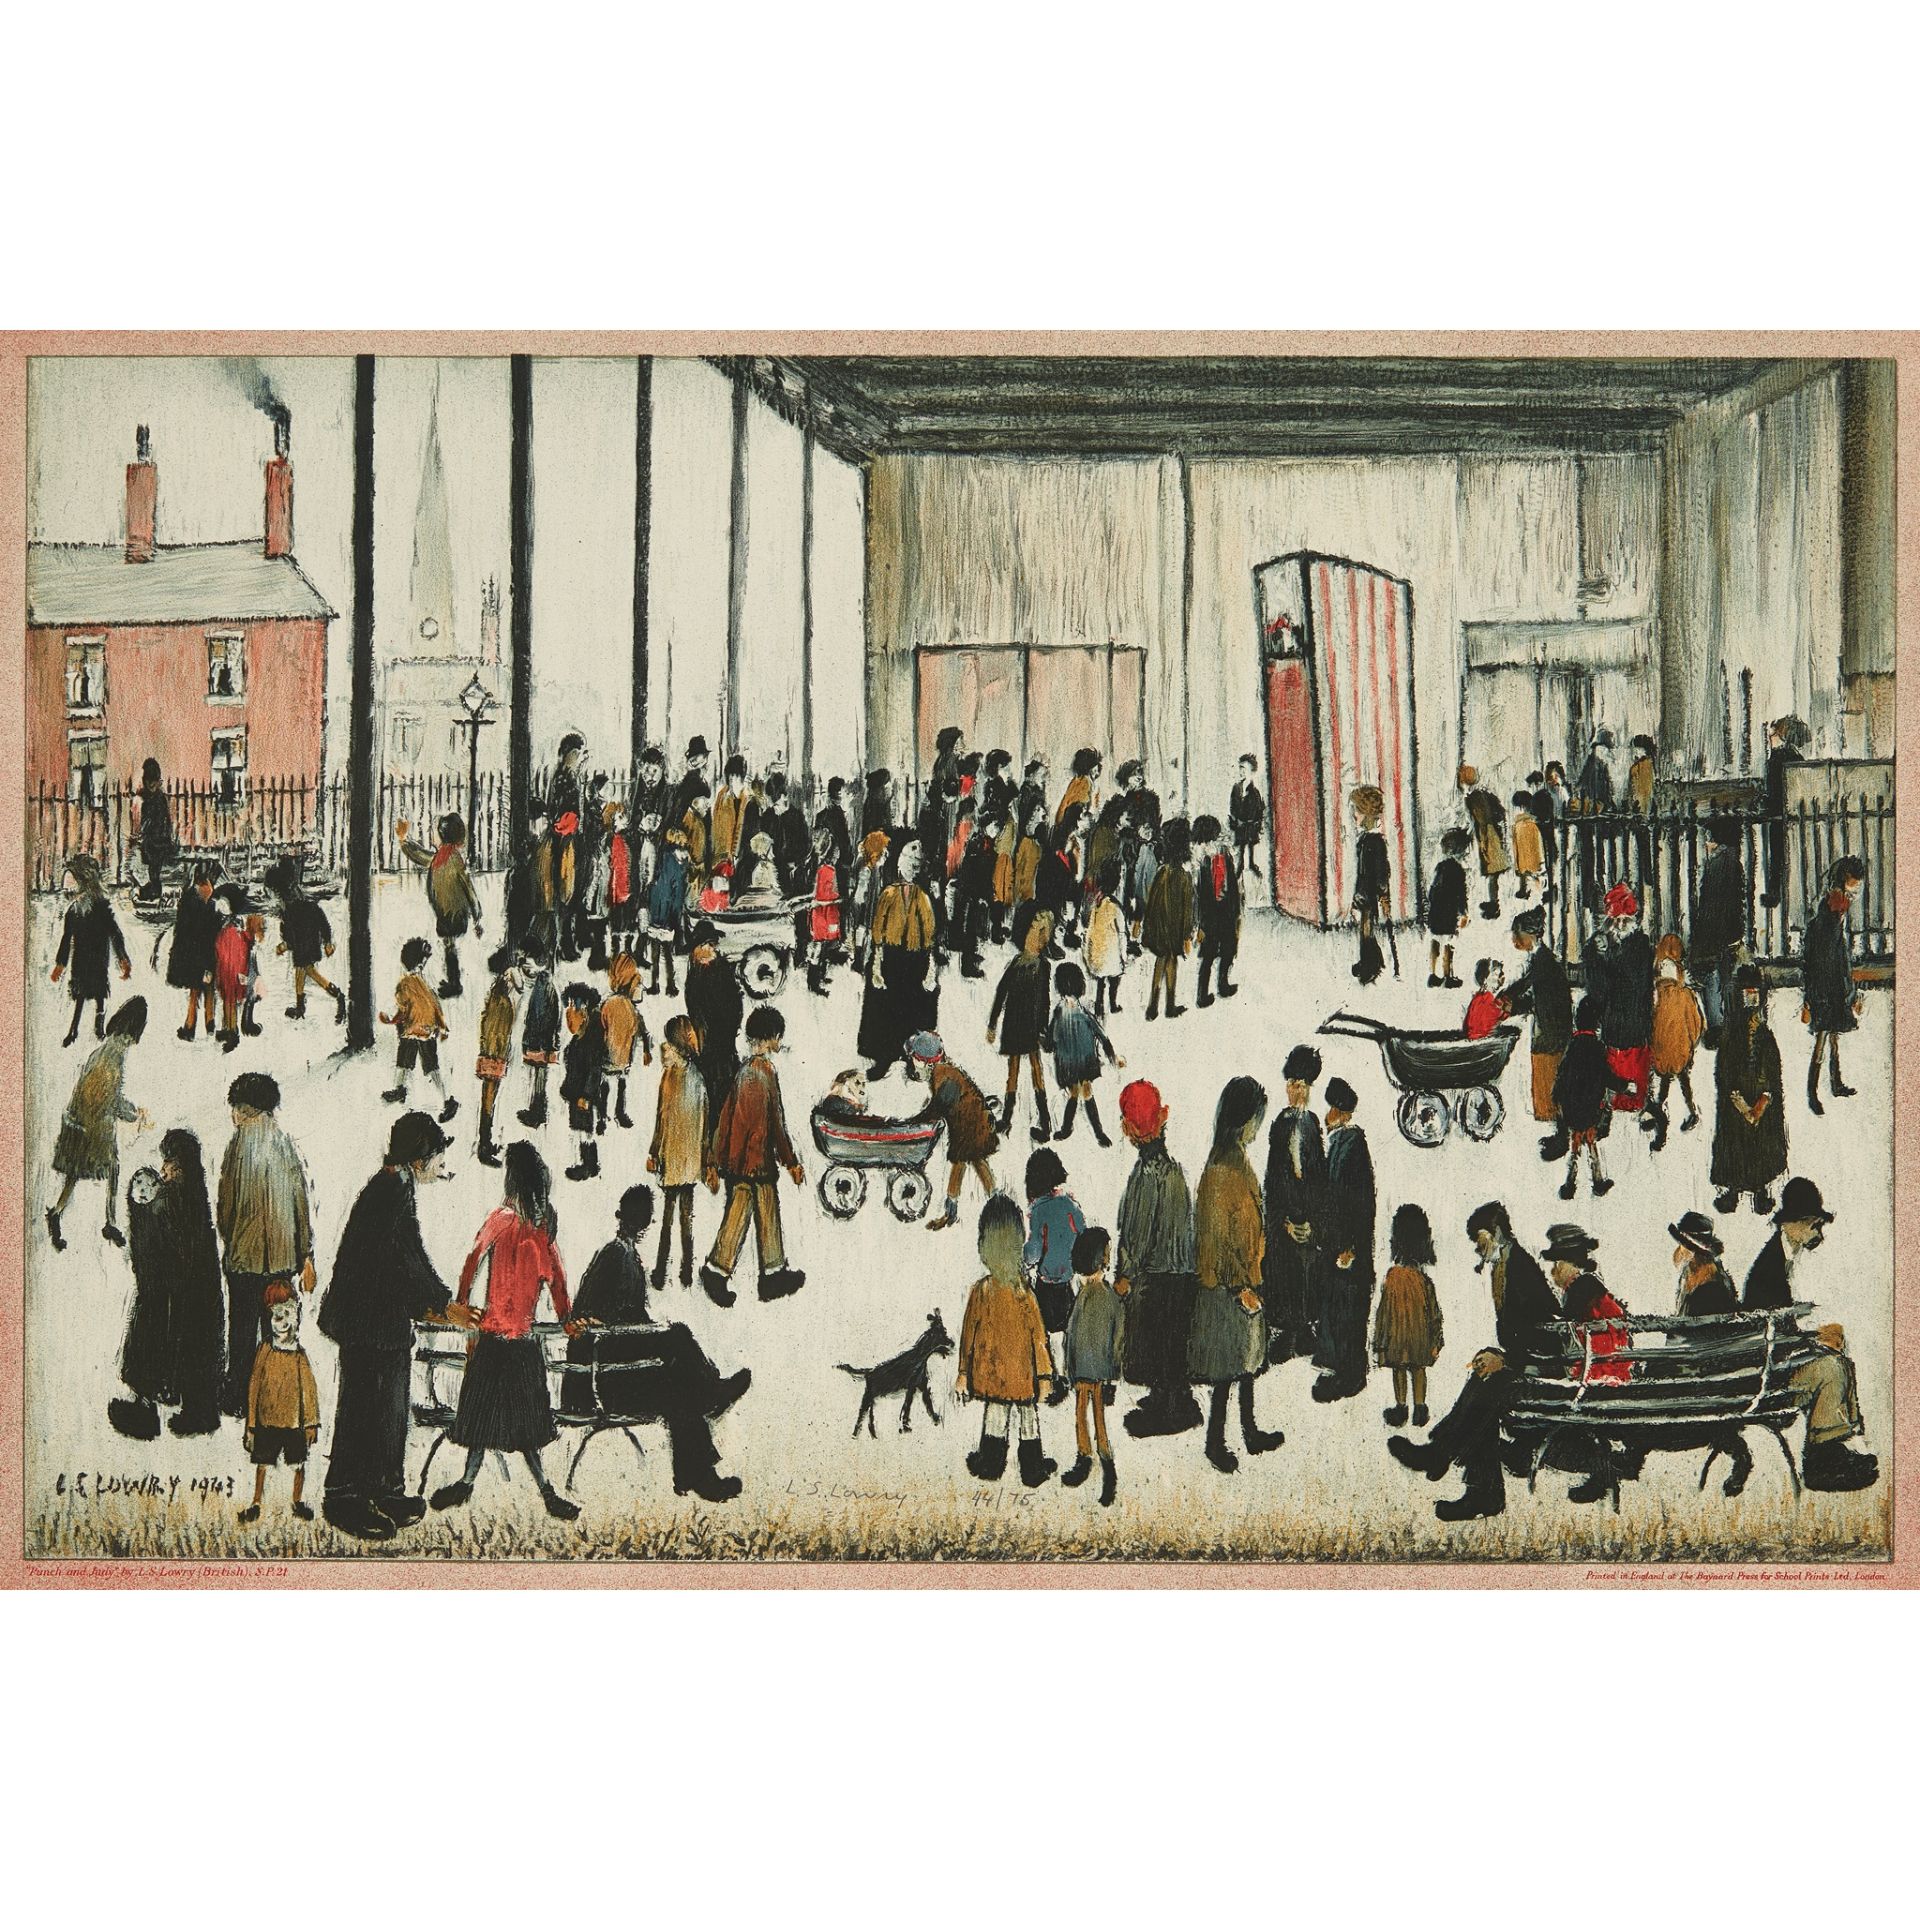 § LAURENCE STEPHEN LOWRY R.A. (BRITISH 1887-1976) PUNCH AND JUDY